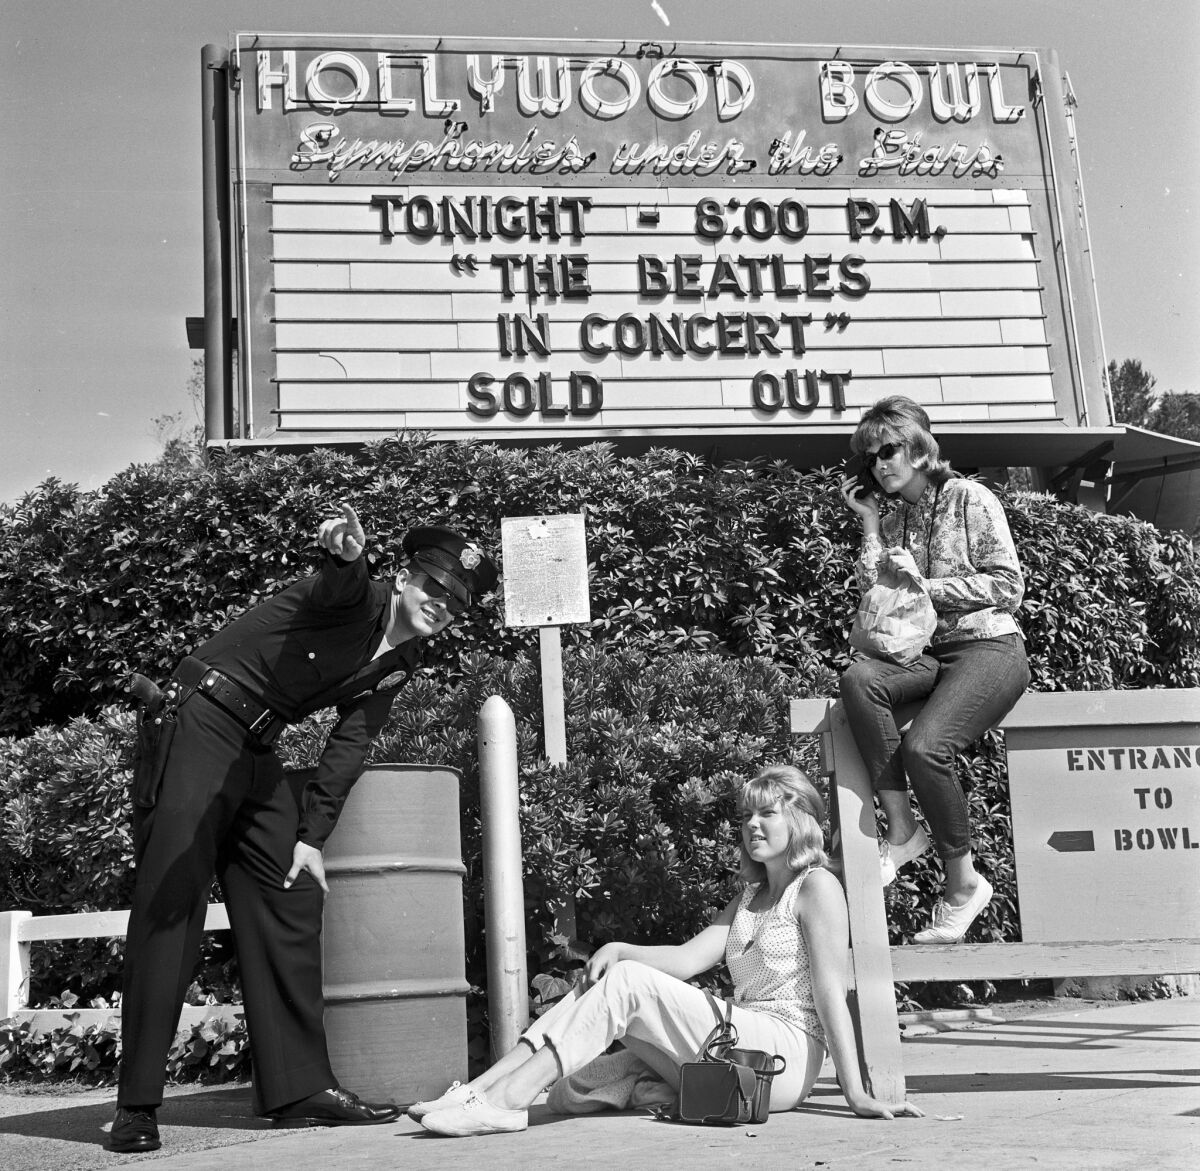 Fans await the arrival of the Beatles at the Hollywood Bowl for the concert on Aug. 23, 1964.